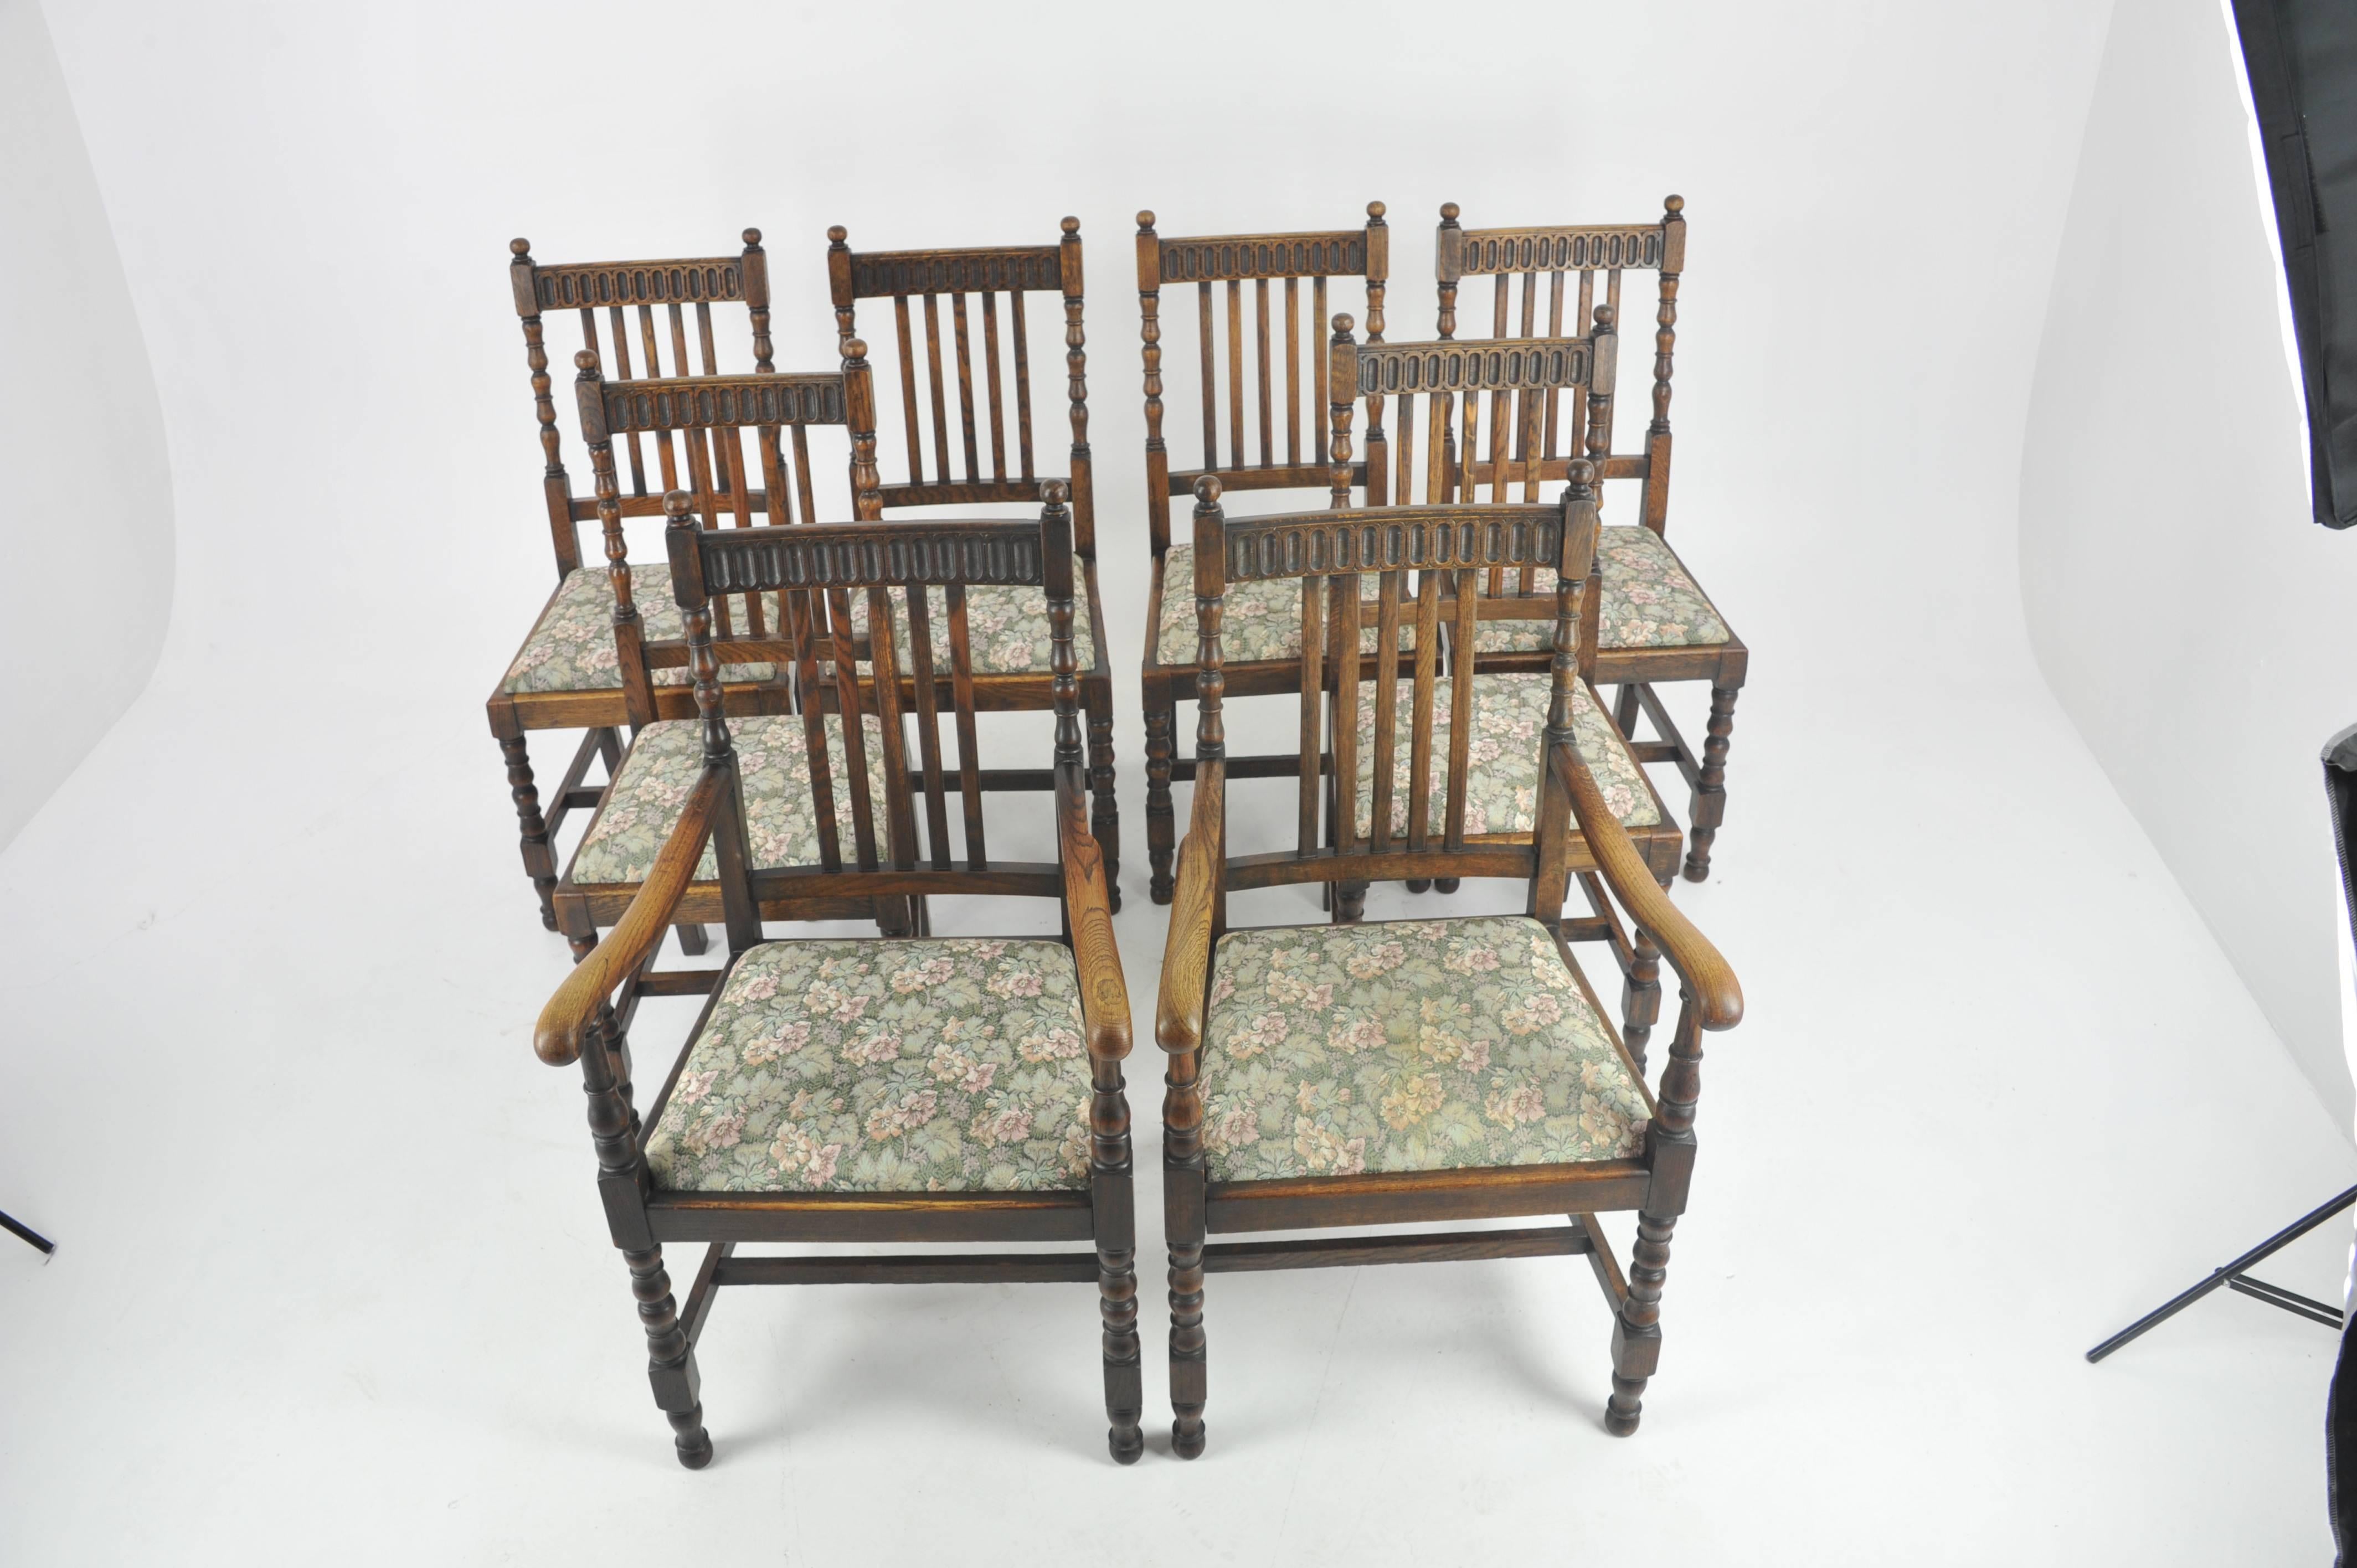 1900 chairs